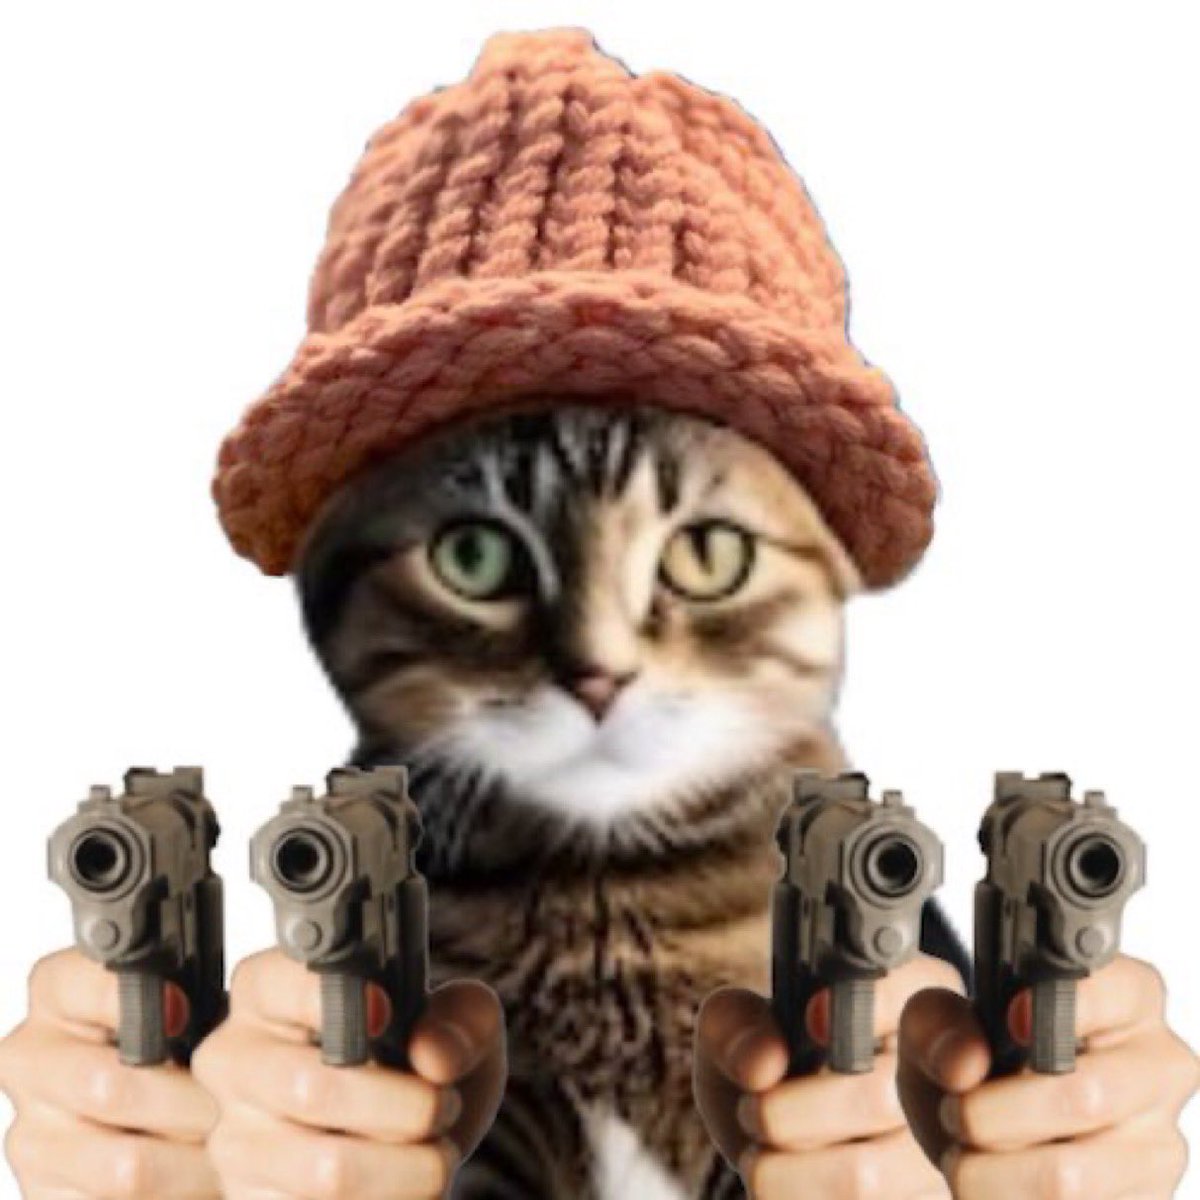 I’m inspector $CWIF , $DOGKILLER 
😂😂🐈🐈🐈

@catwifhatsolana